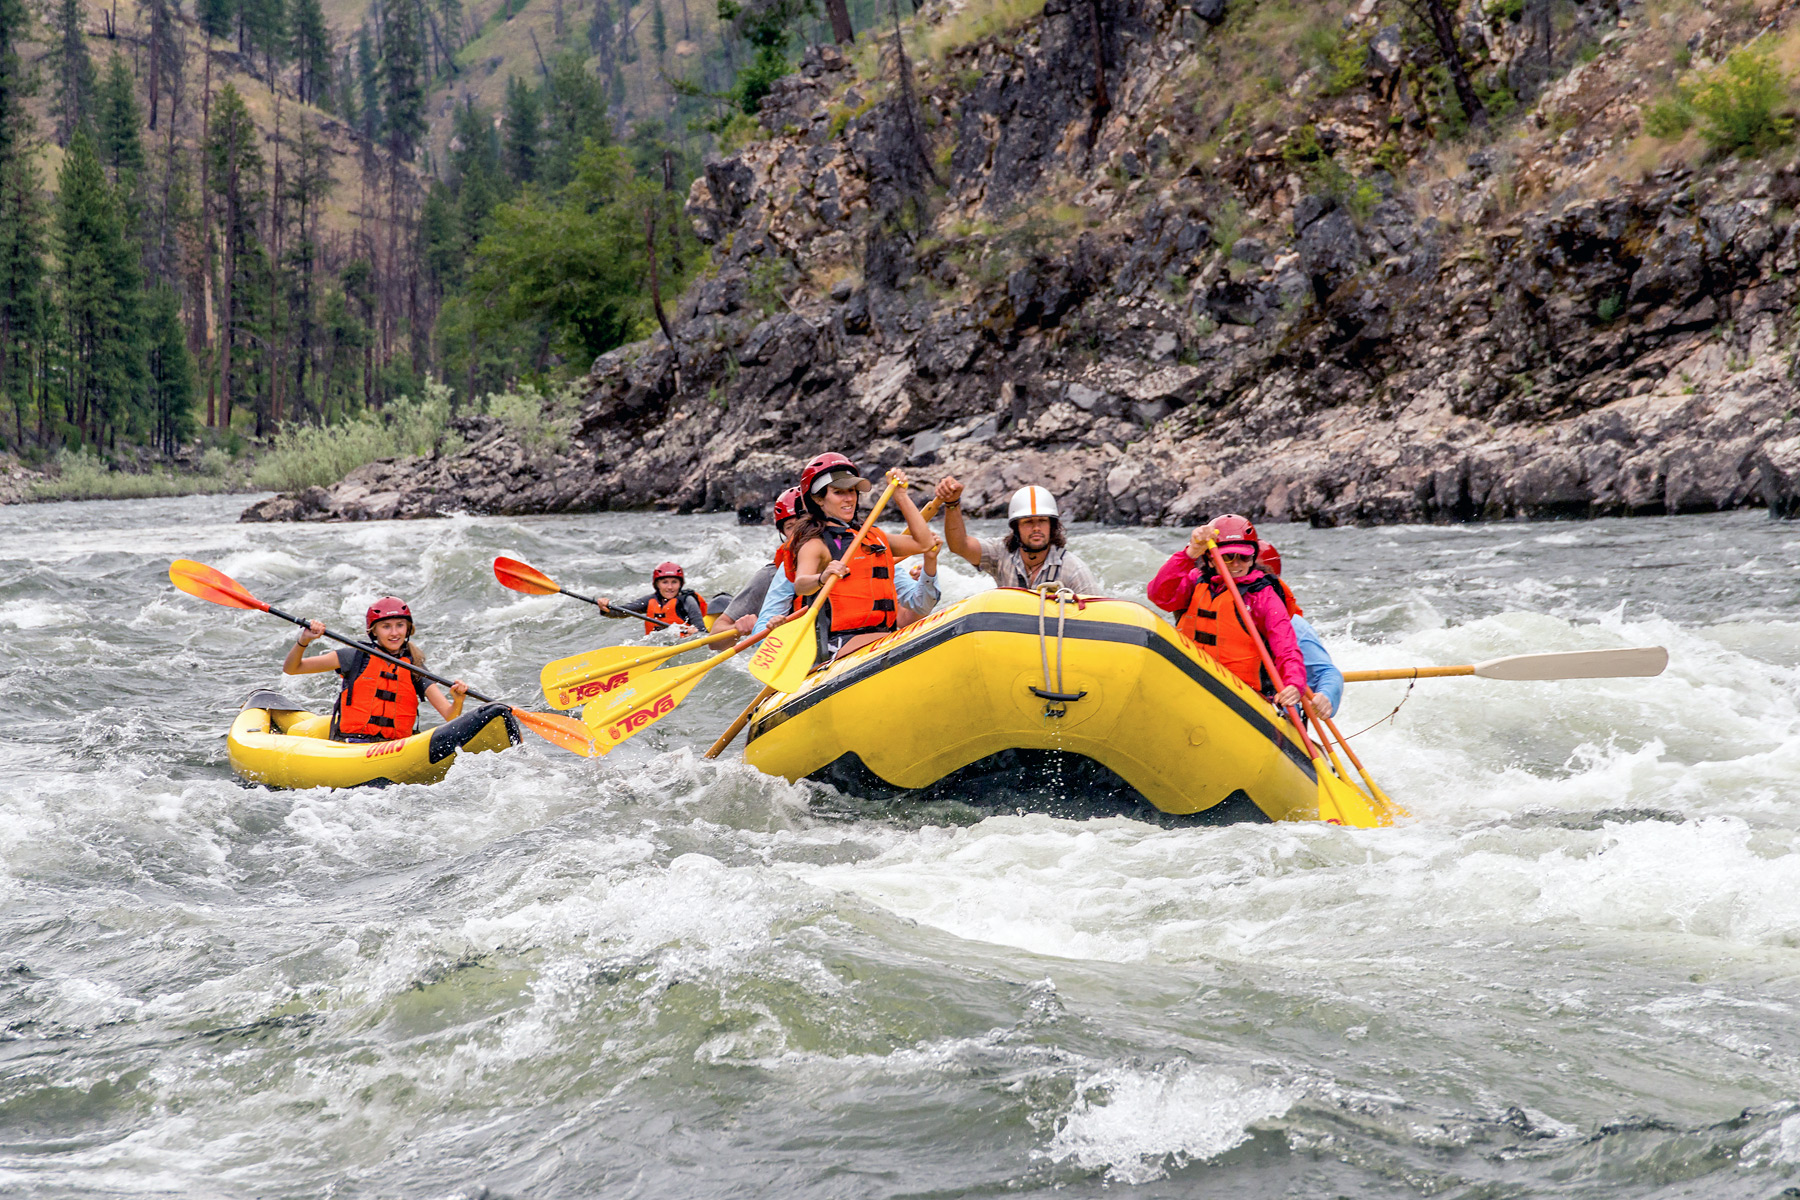 A paddle boat full of people and two solo kayakers take on a rapid on the Main Salmon River in Idaho.